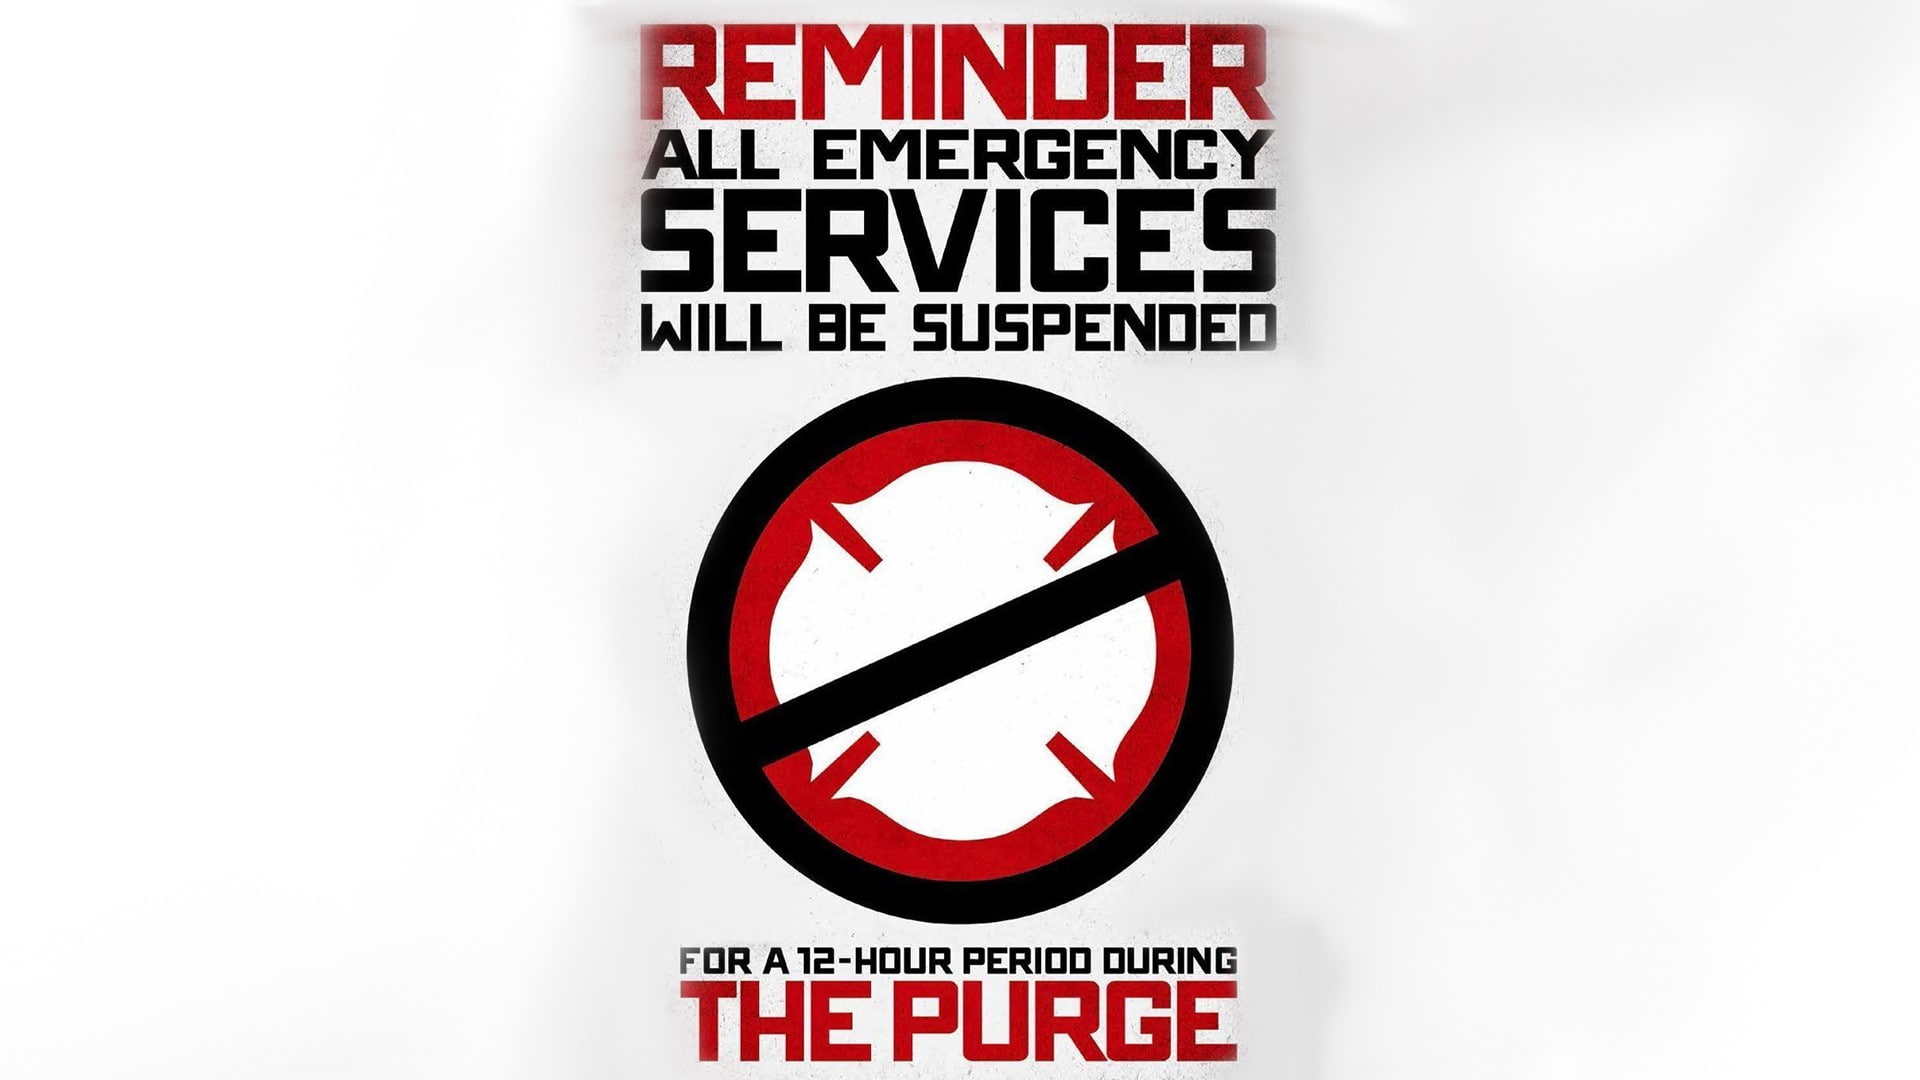 The Purge, The Purge: Anarchy, the purge election year, police